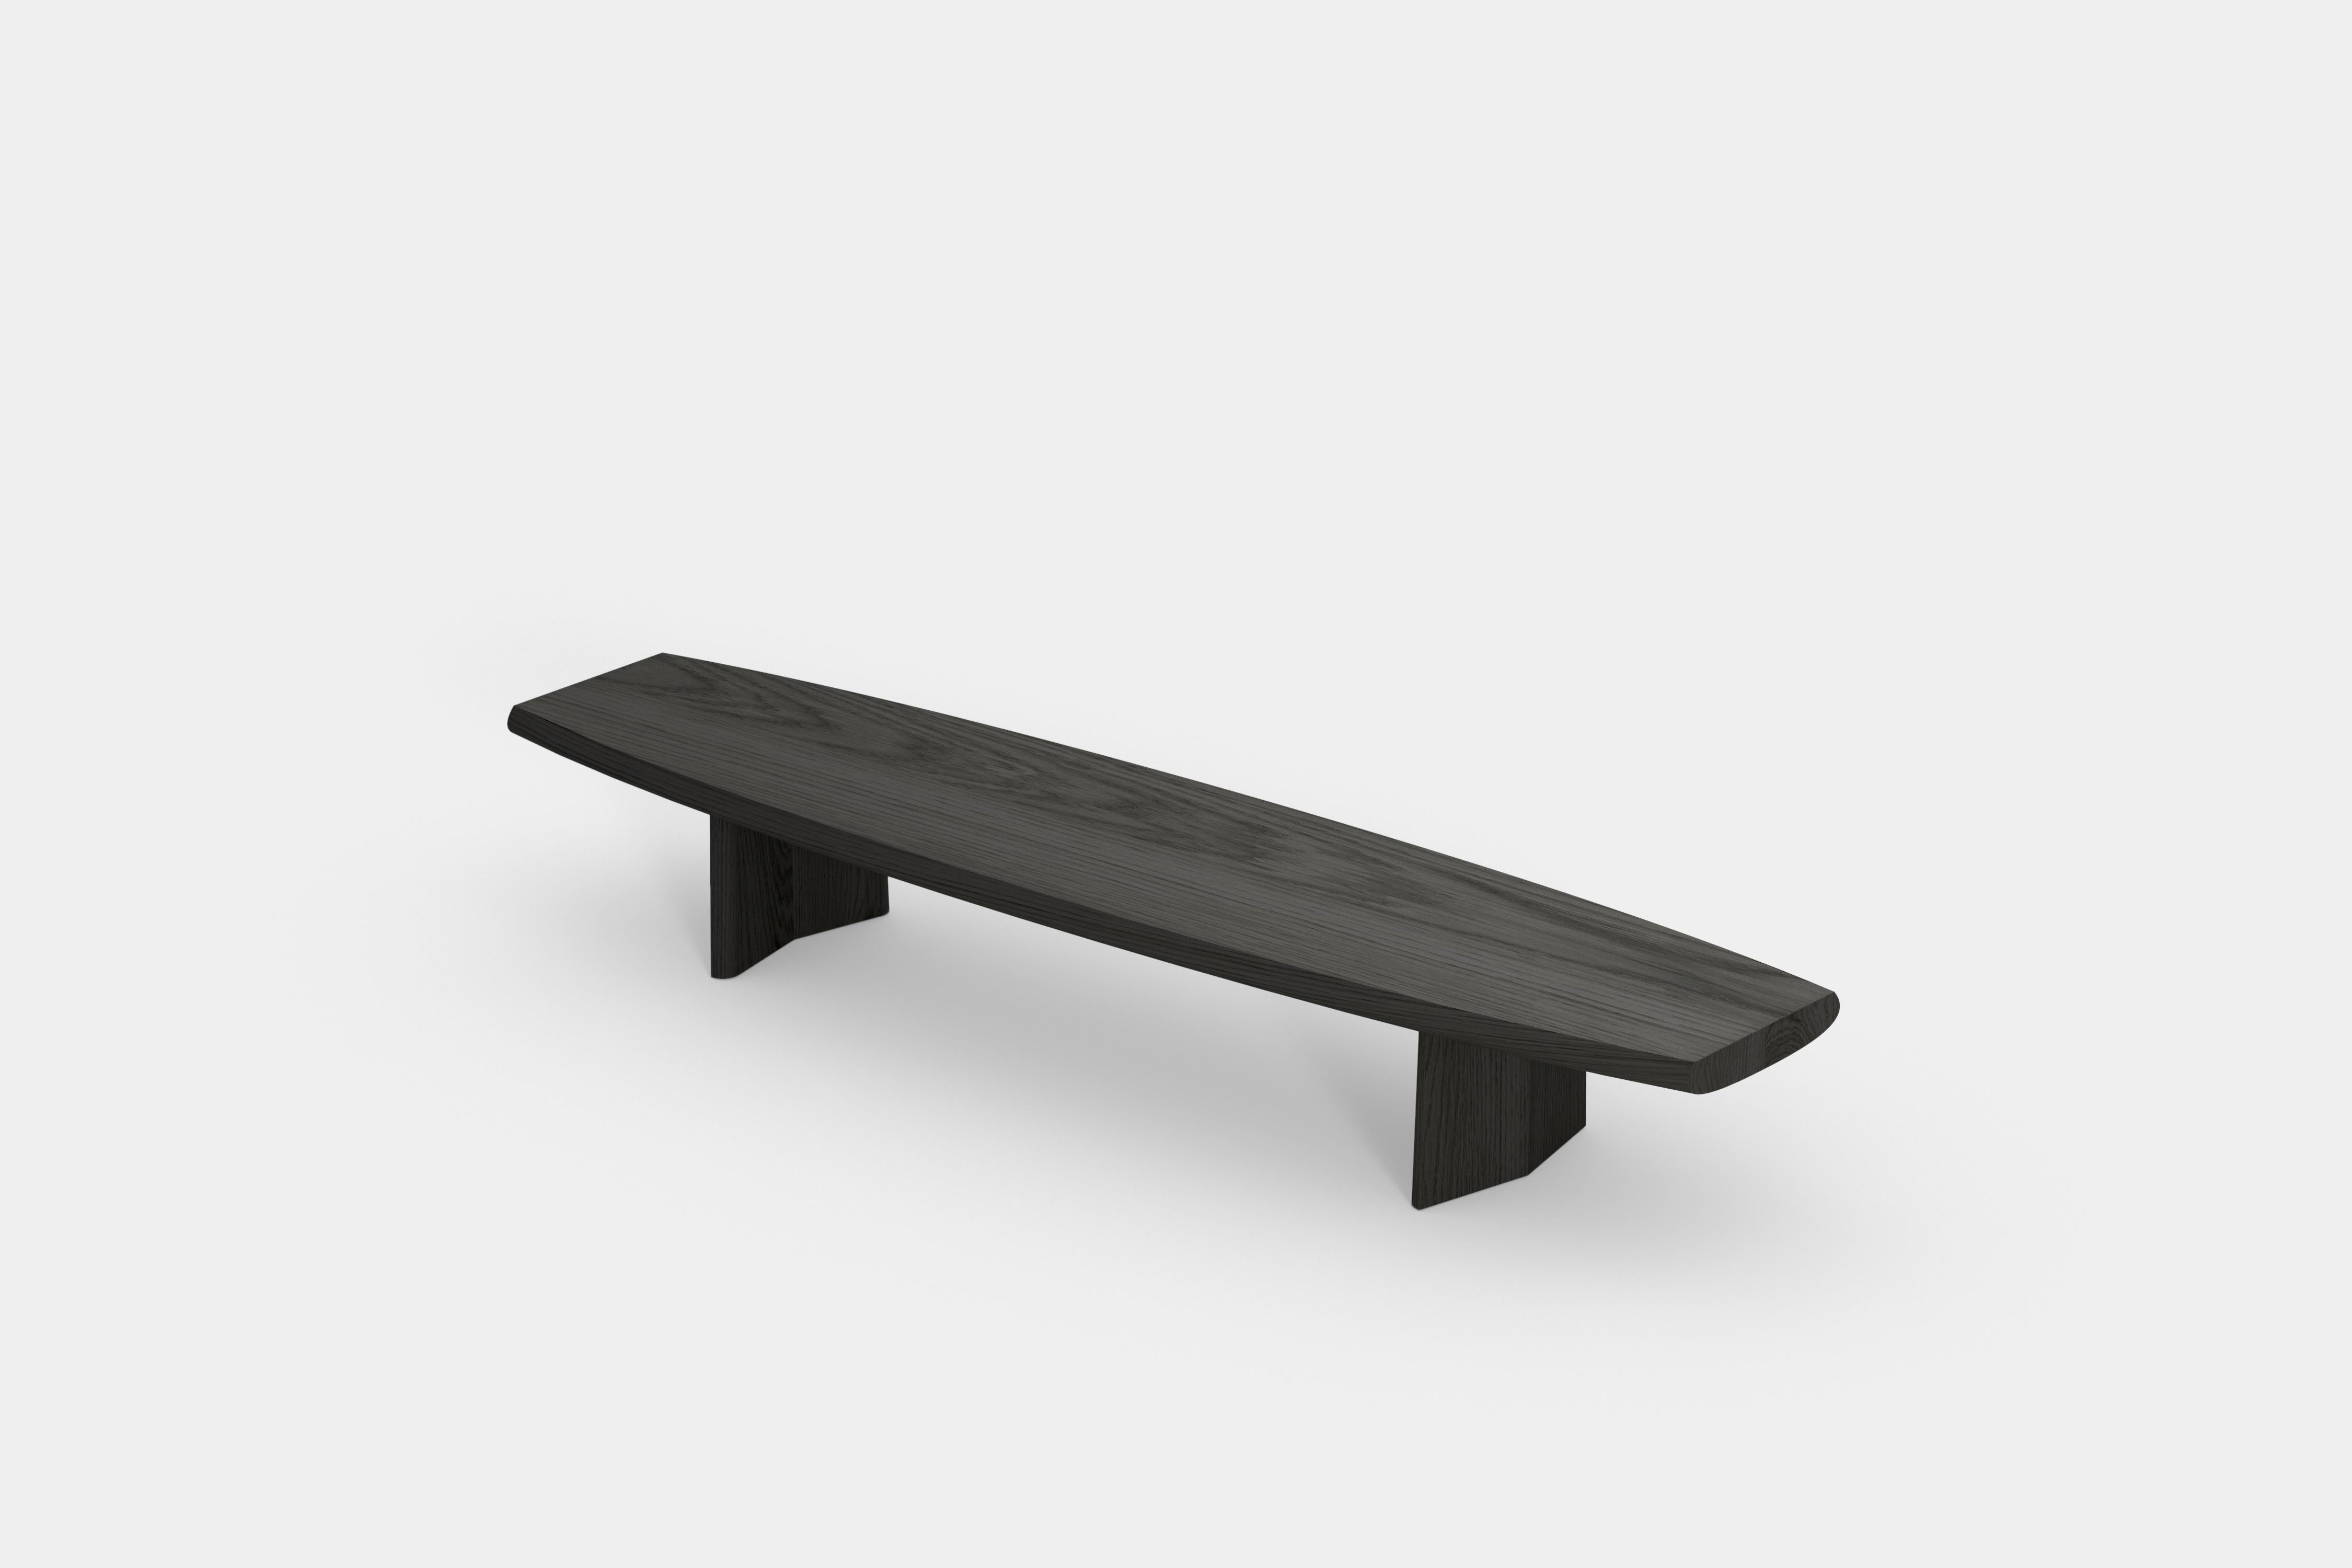 Peana Low Coffee Table, Bench in Black Tinted Wood Finish by Joel Escalona

Peana, which in English translates to base or pedestal, is a series of tables and different surfaces inspired by the idea of creating worthy furniture pieces to place and